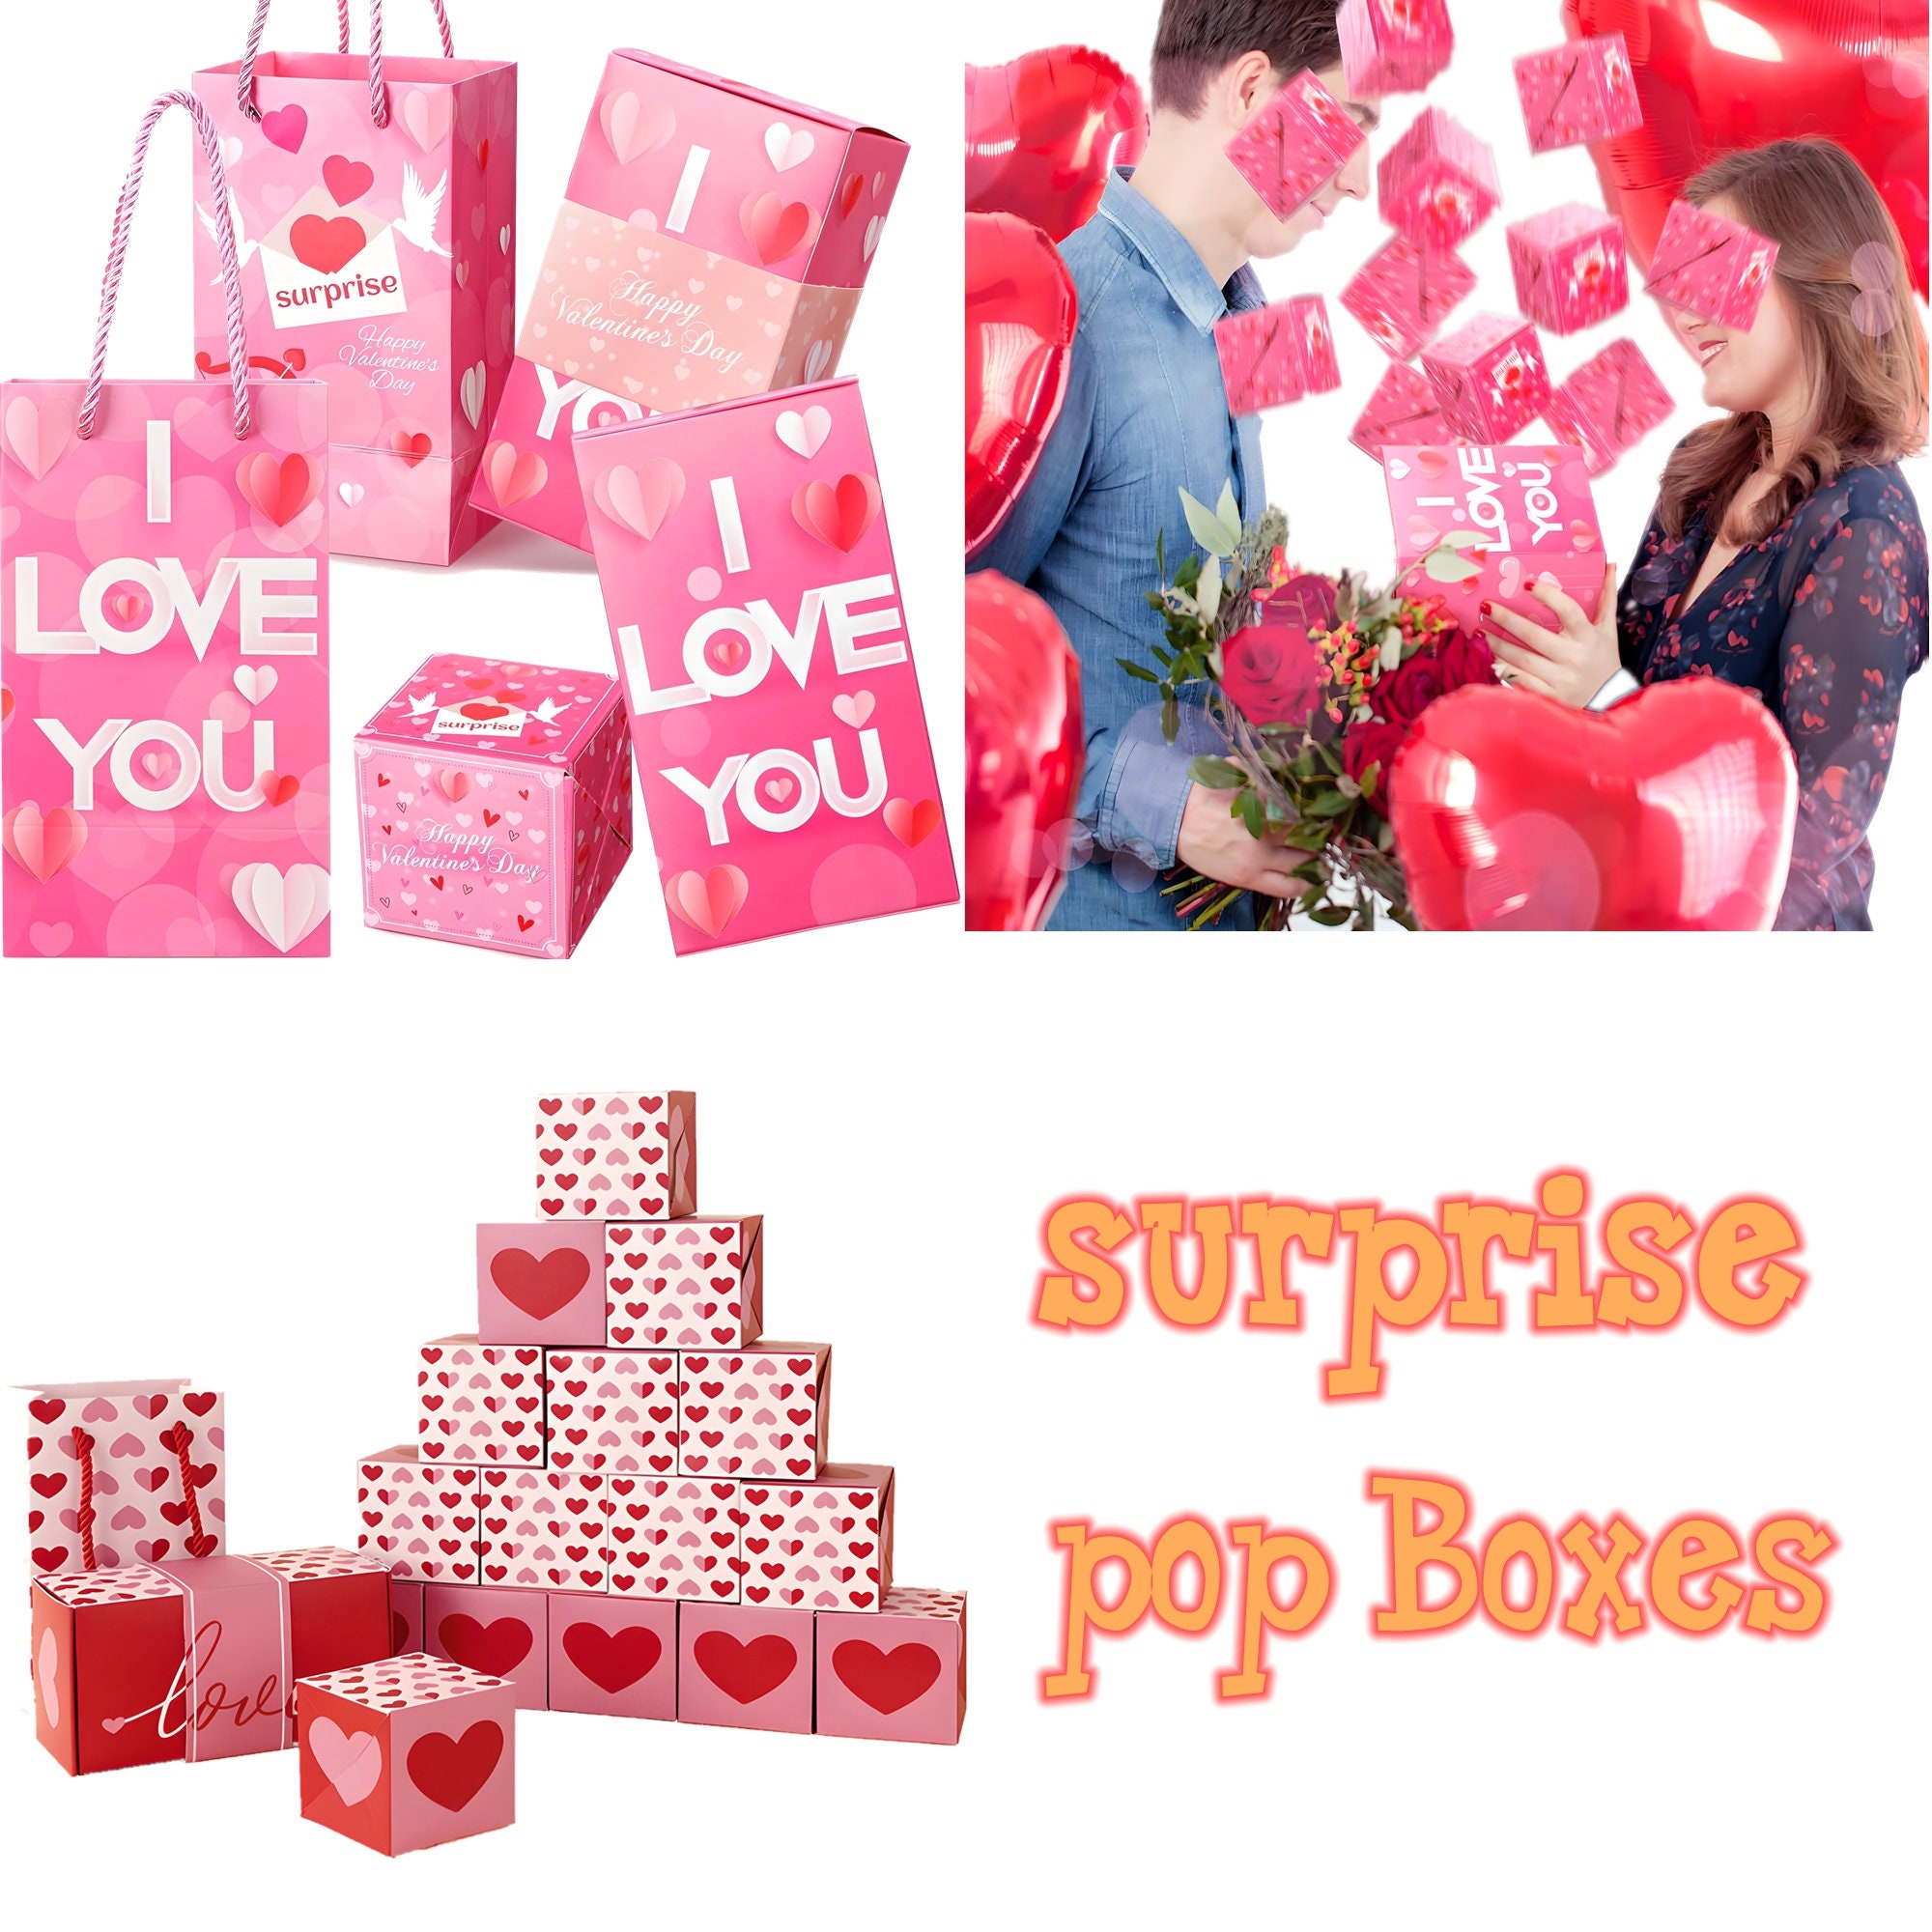 Photo Gift Explosion Box, Valentine's Day Surprise Gift, Anniversary Photo  Album With LED Lights, Couple Exploding Box 